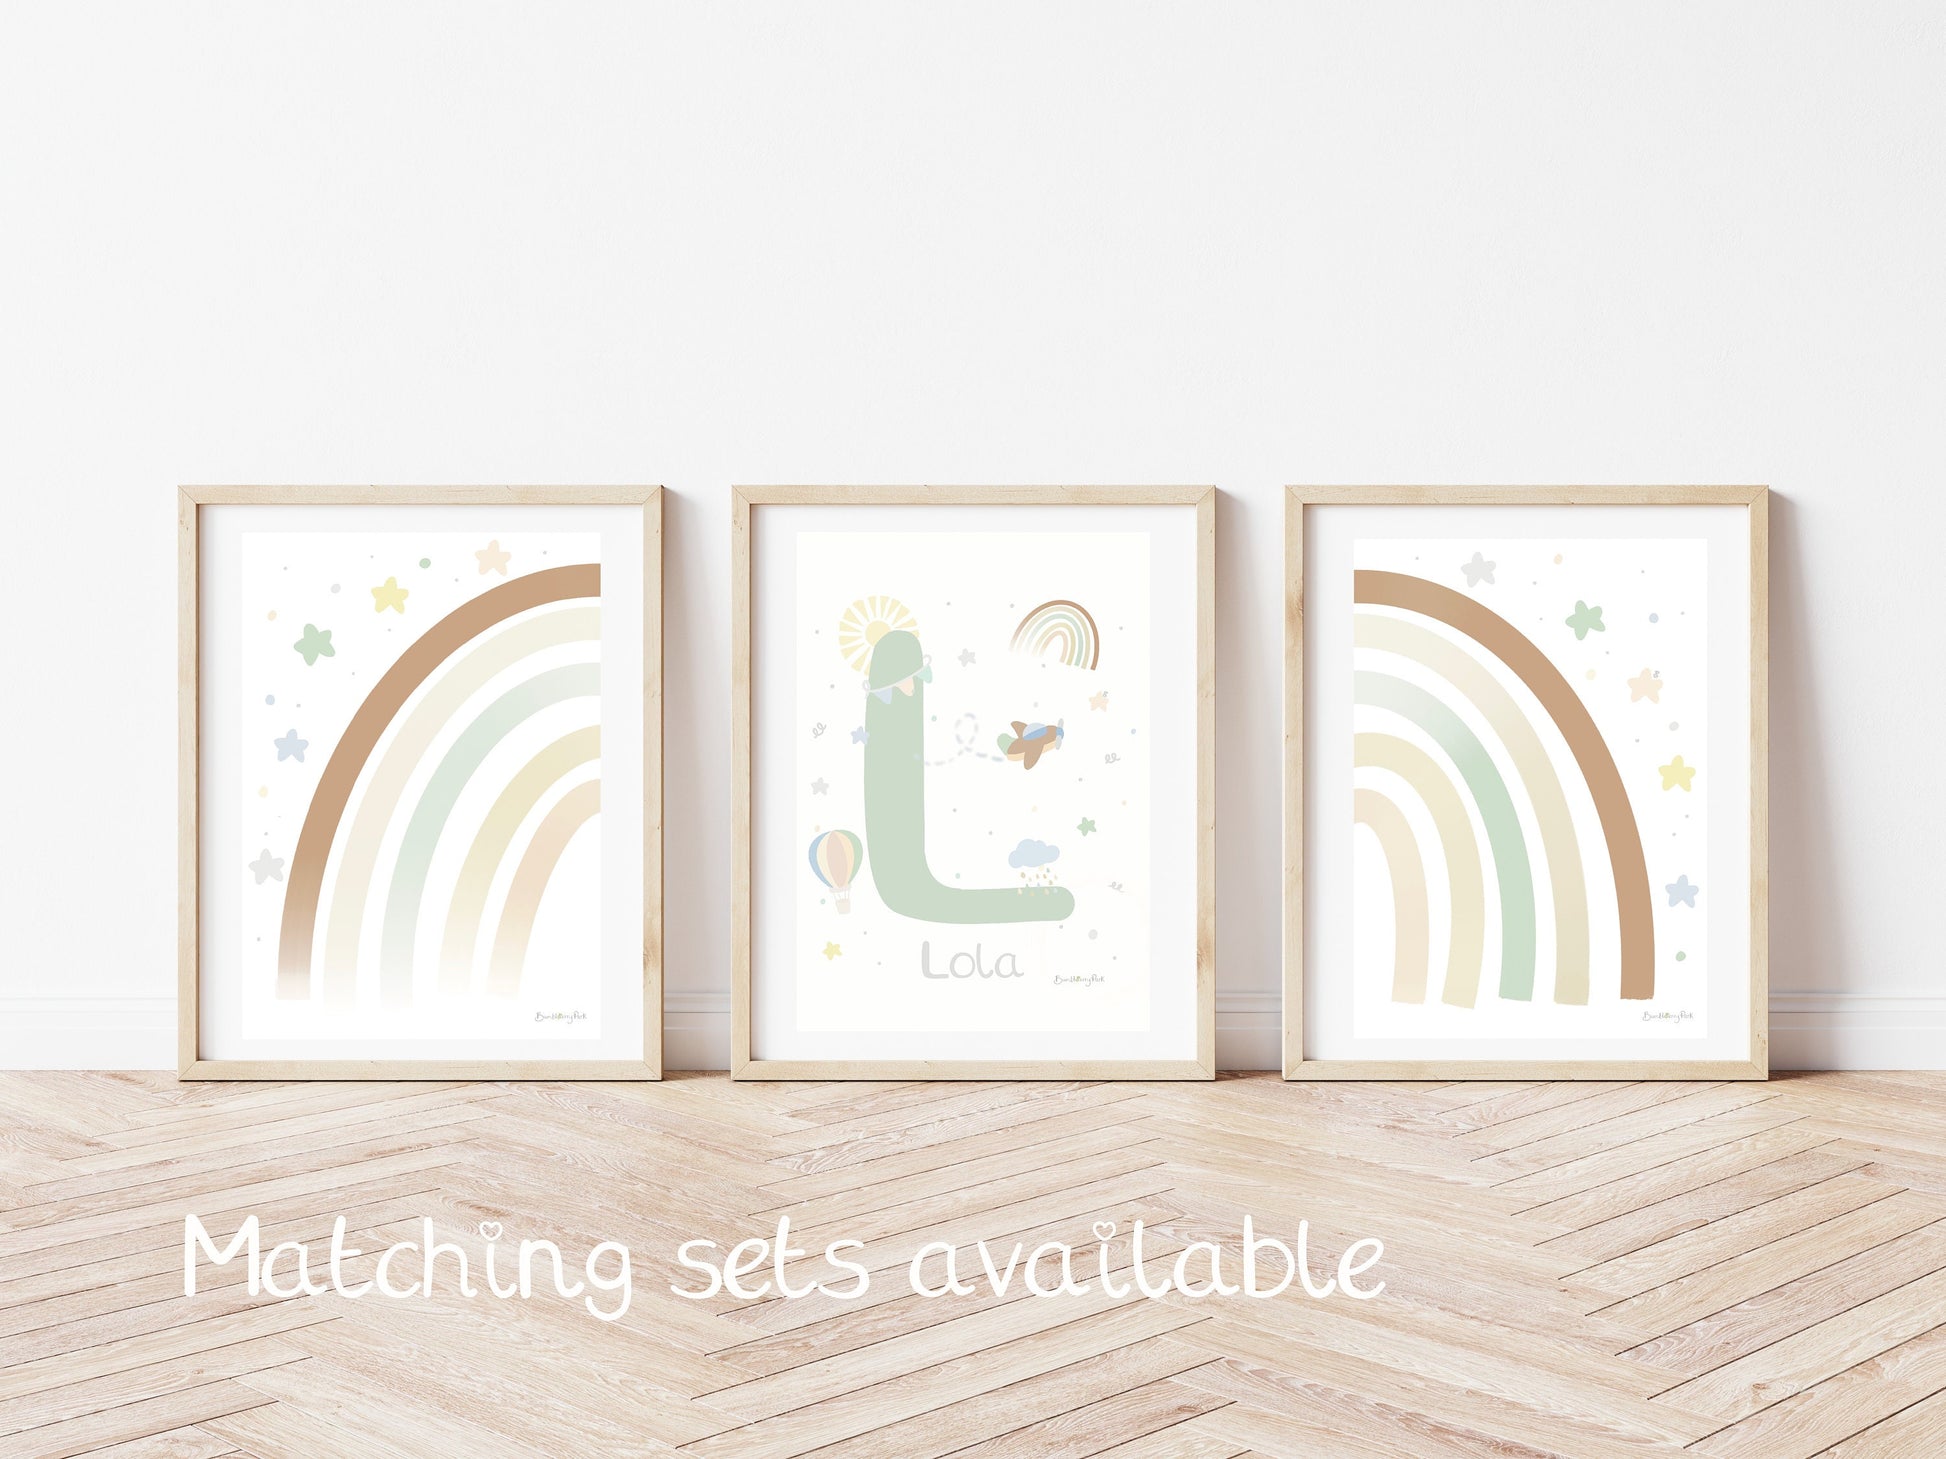 set of 3 rainbow and baby name and initial wall prints for children's playroom decor in boho chic style